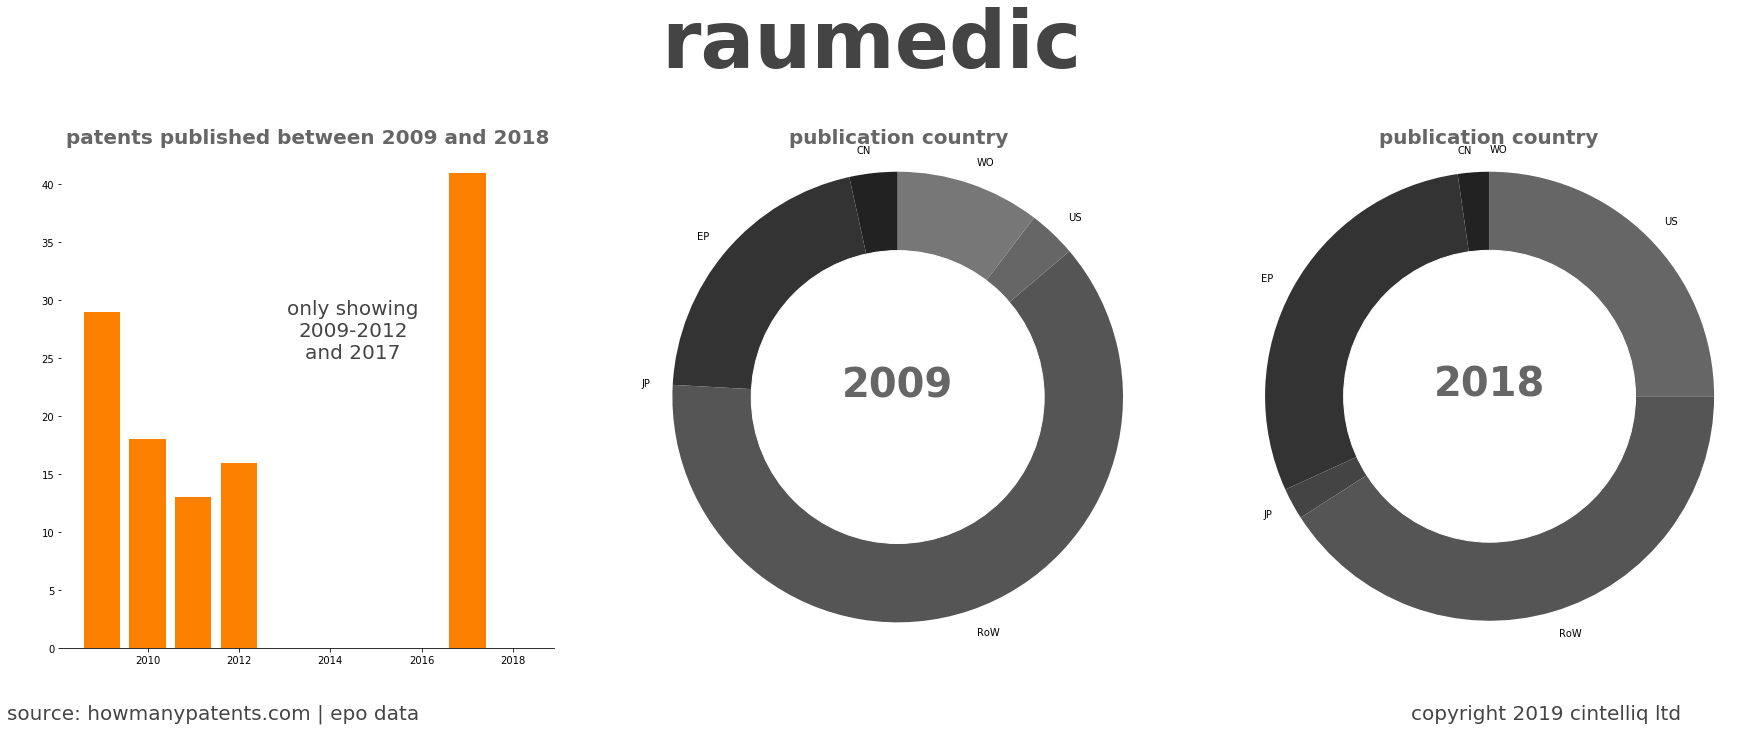 summary of patents for Raumedic